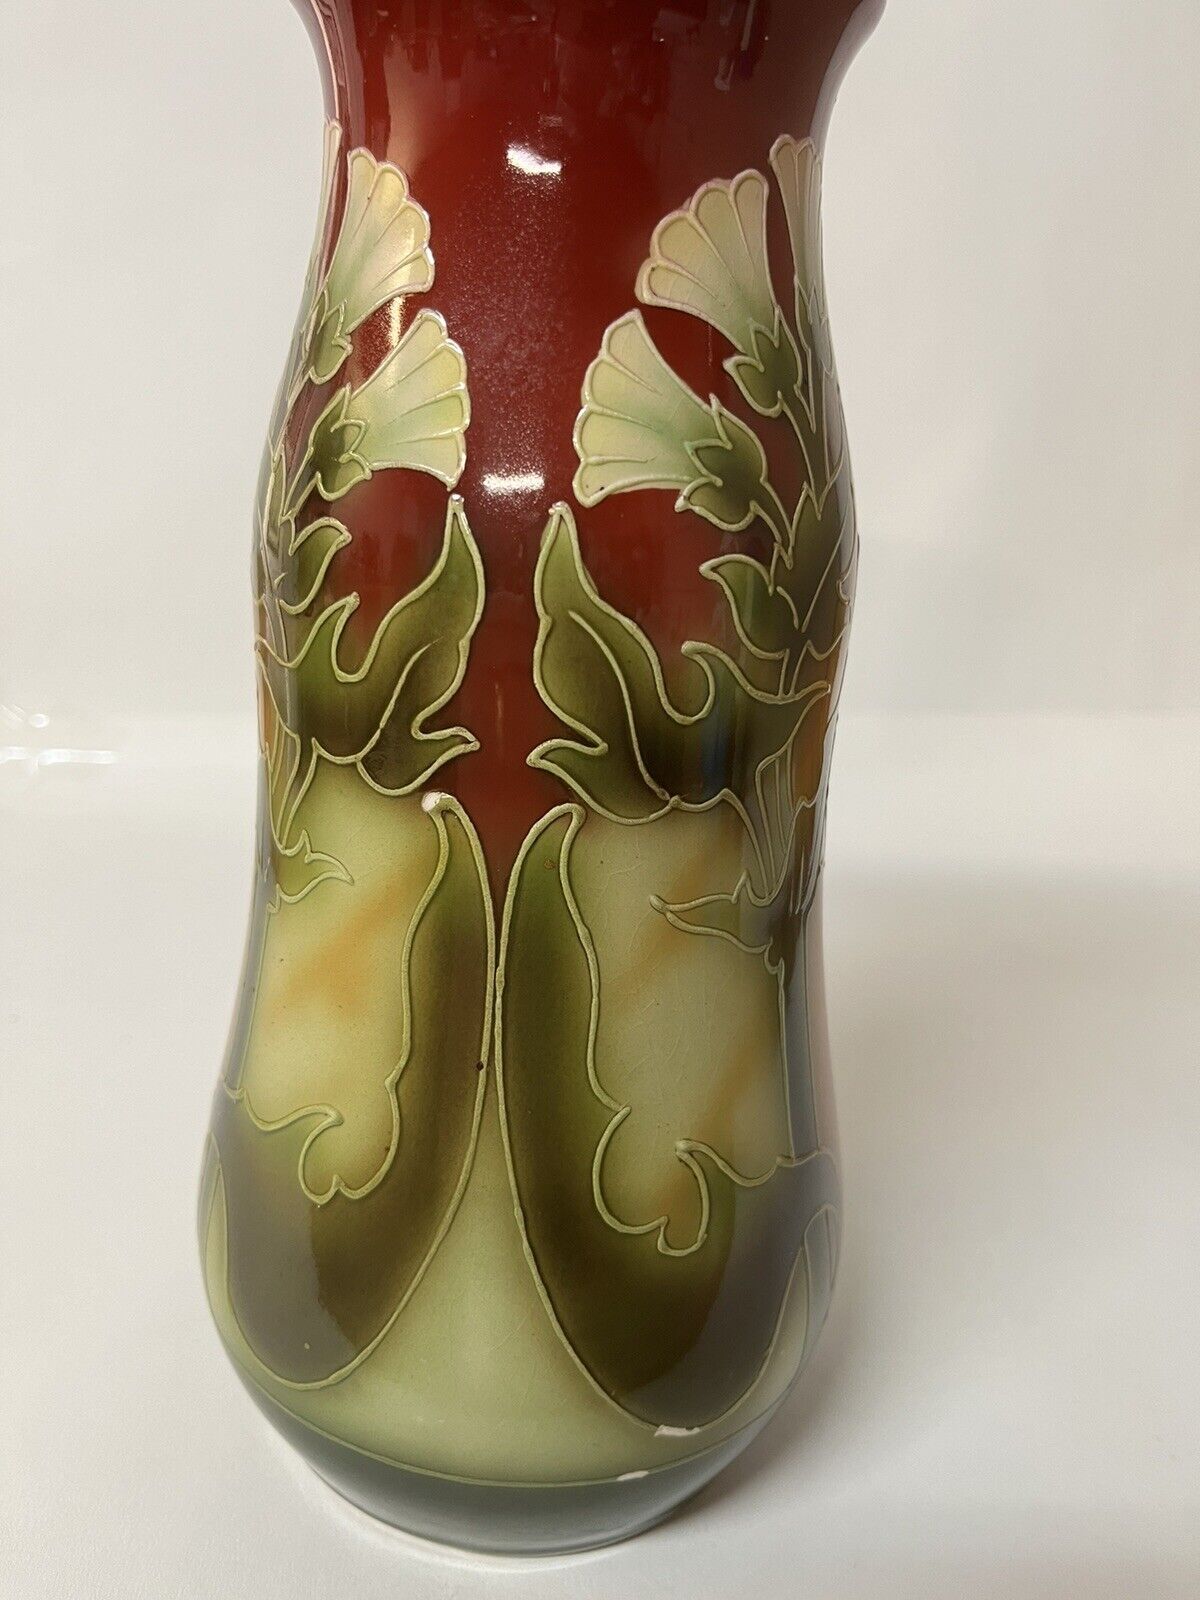 Vintage Royal Vase #2377 From Bonn, Germany 9.75 Inches Tall 